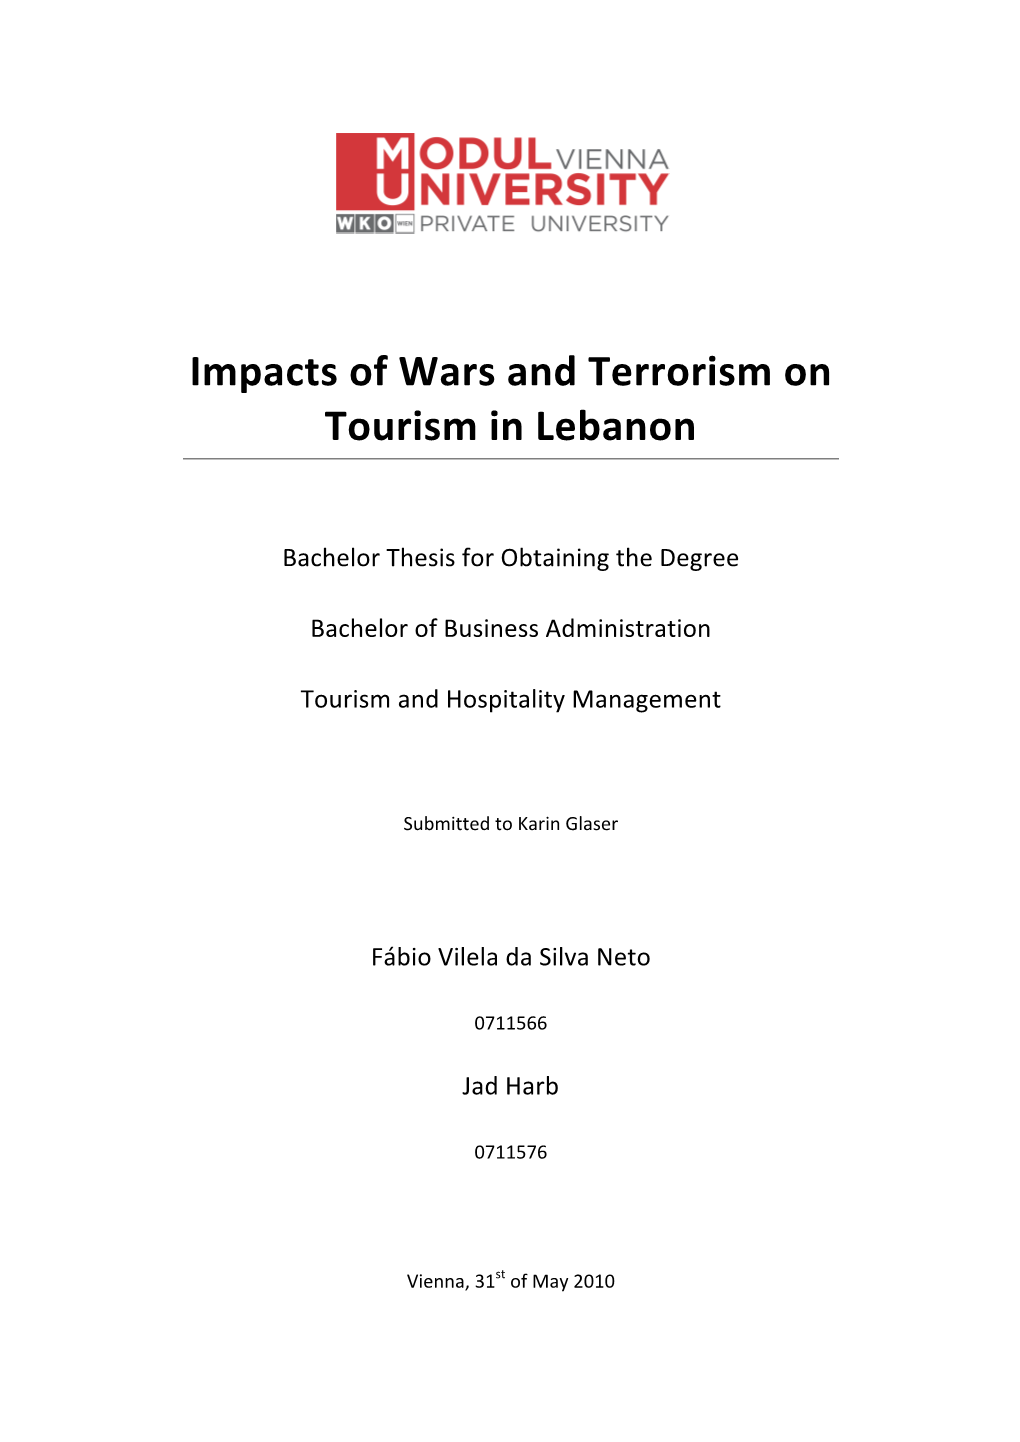 Impacts of Wars and Terrorism on Tourism in Lebanon